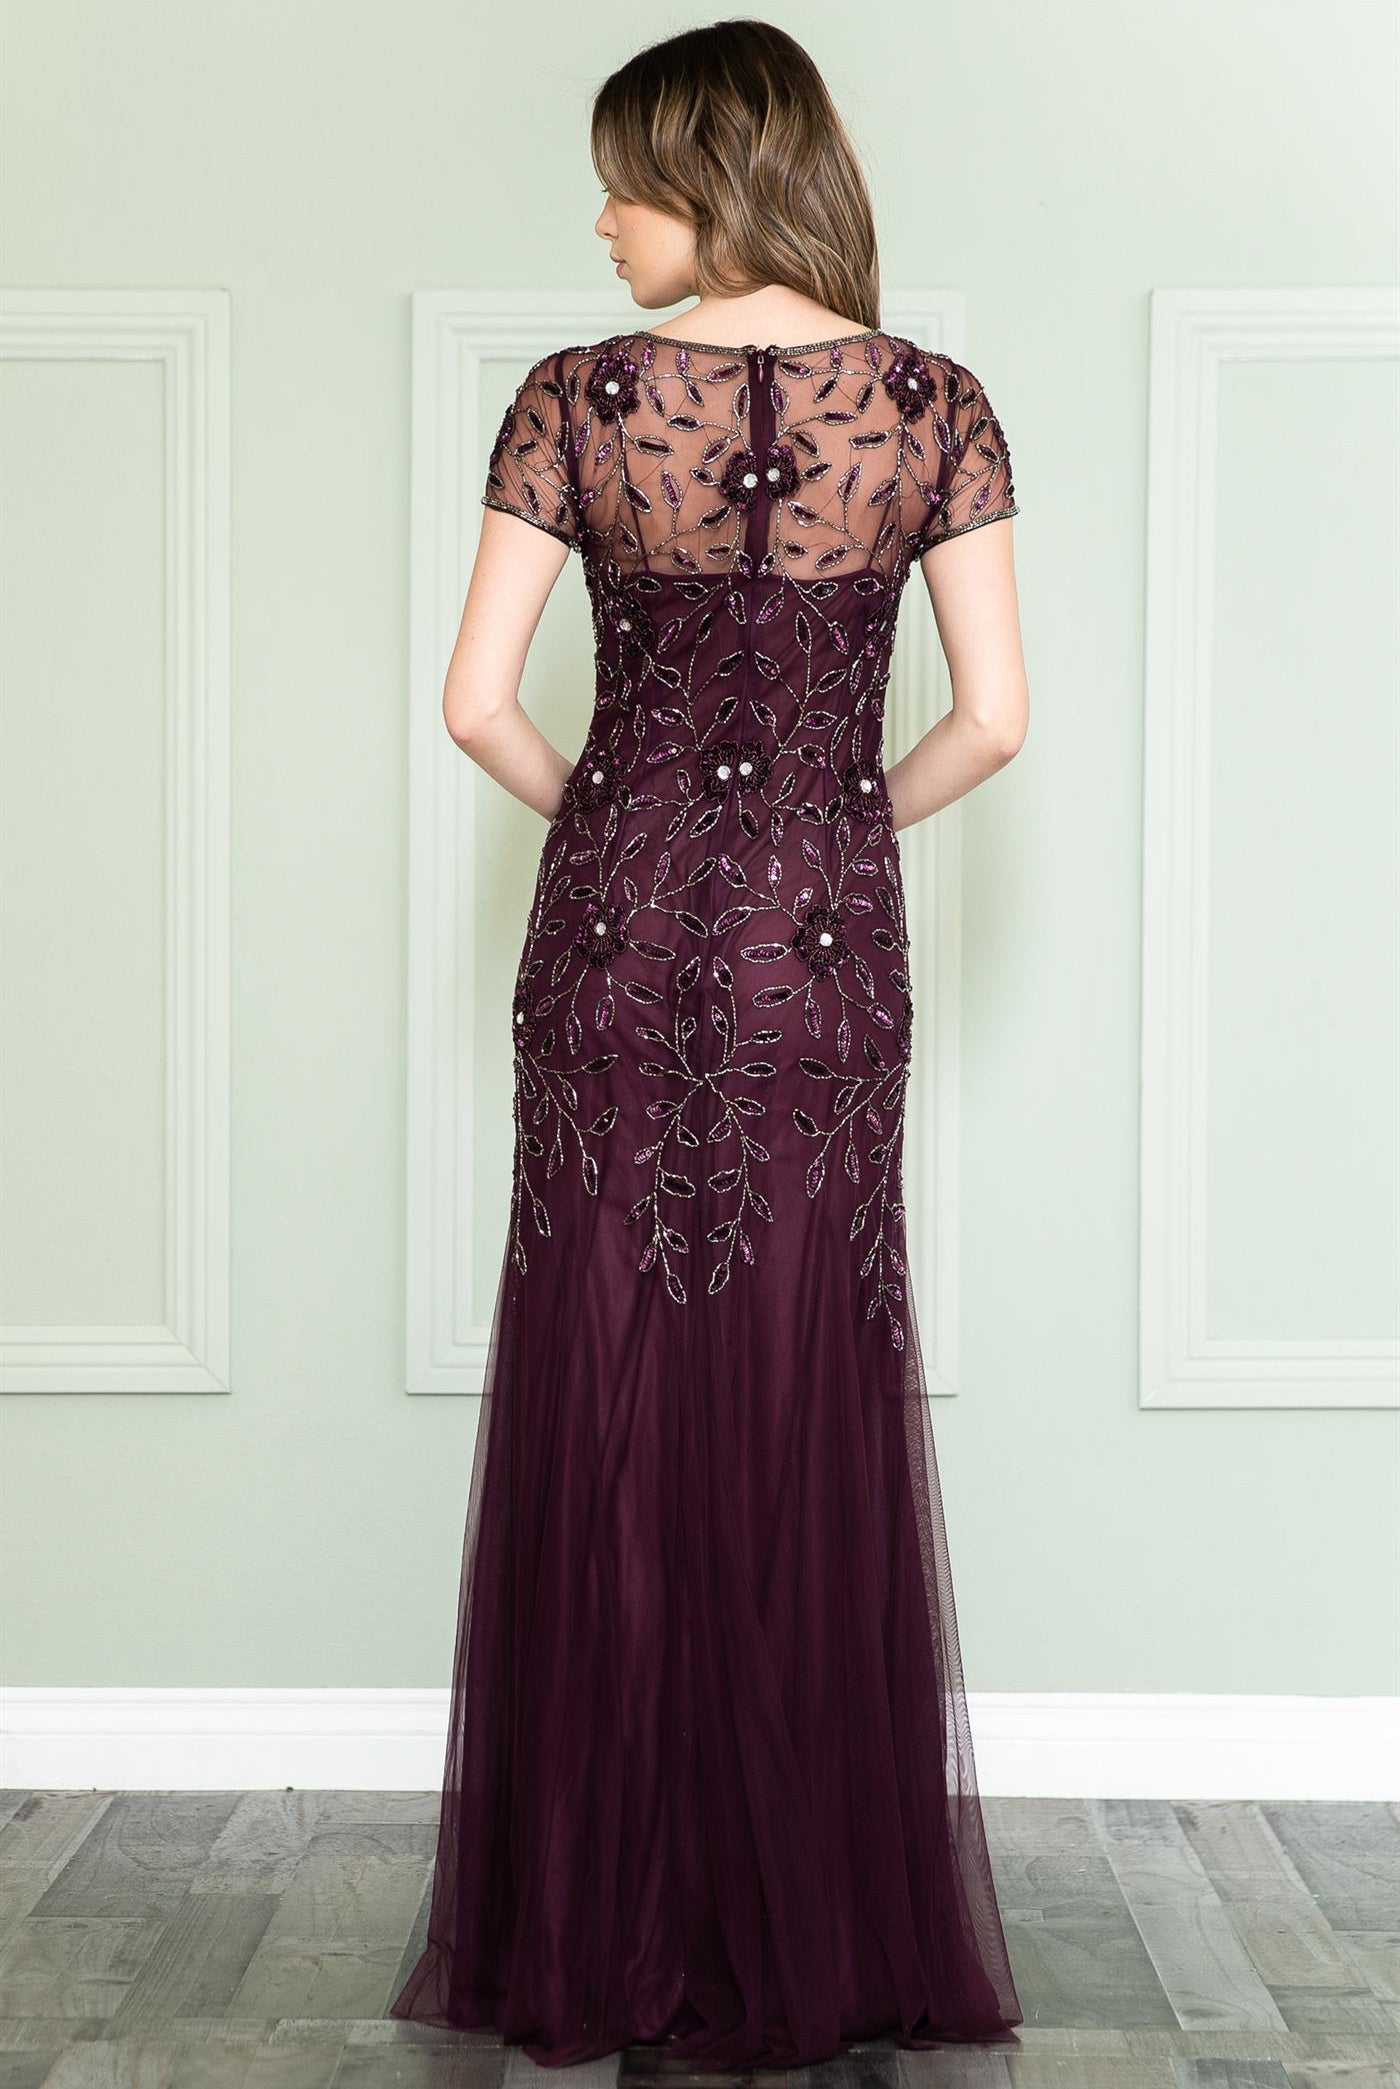 Embroidered Bodice Long Dress with Short Sleeves and Illusion Neckline-smcdress